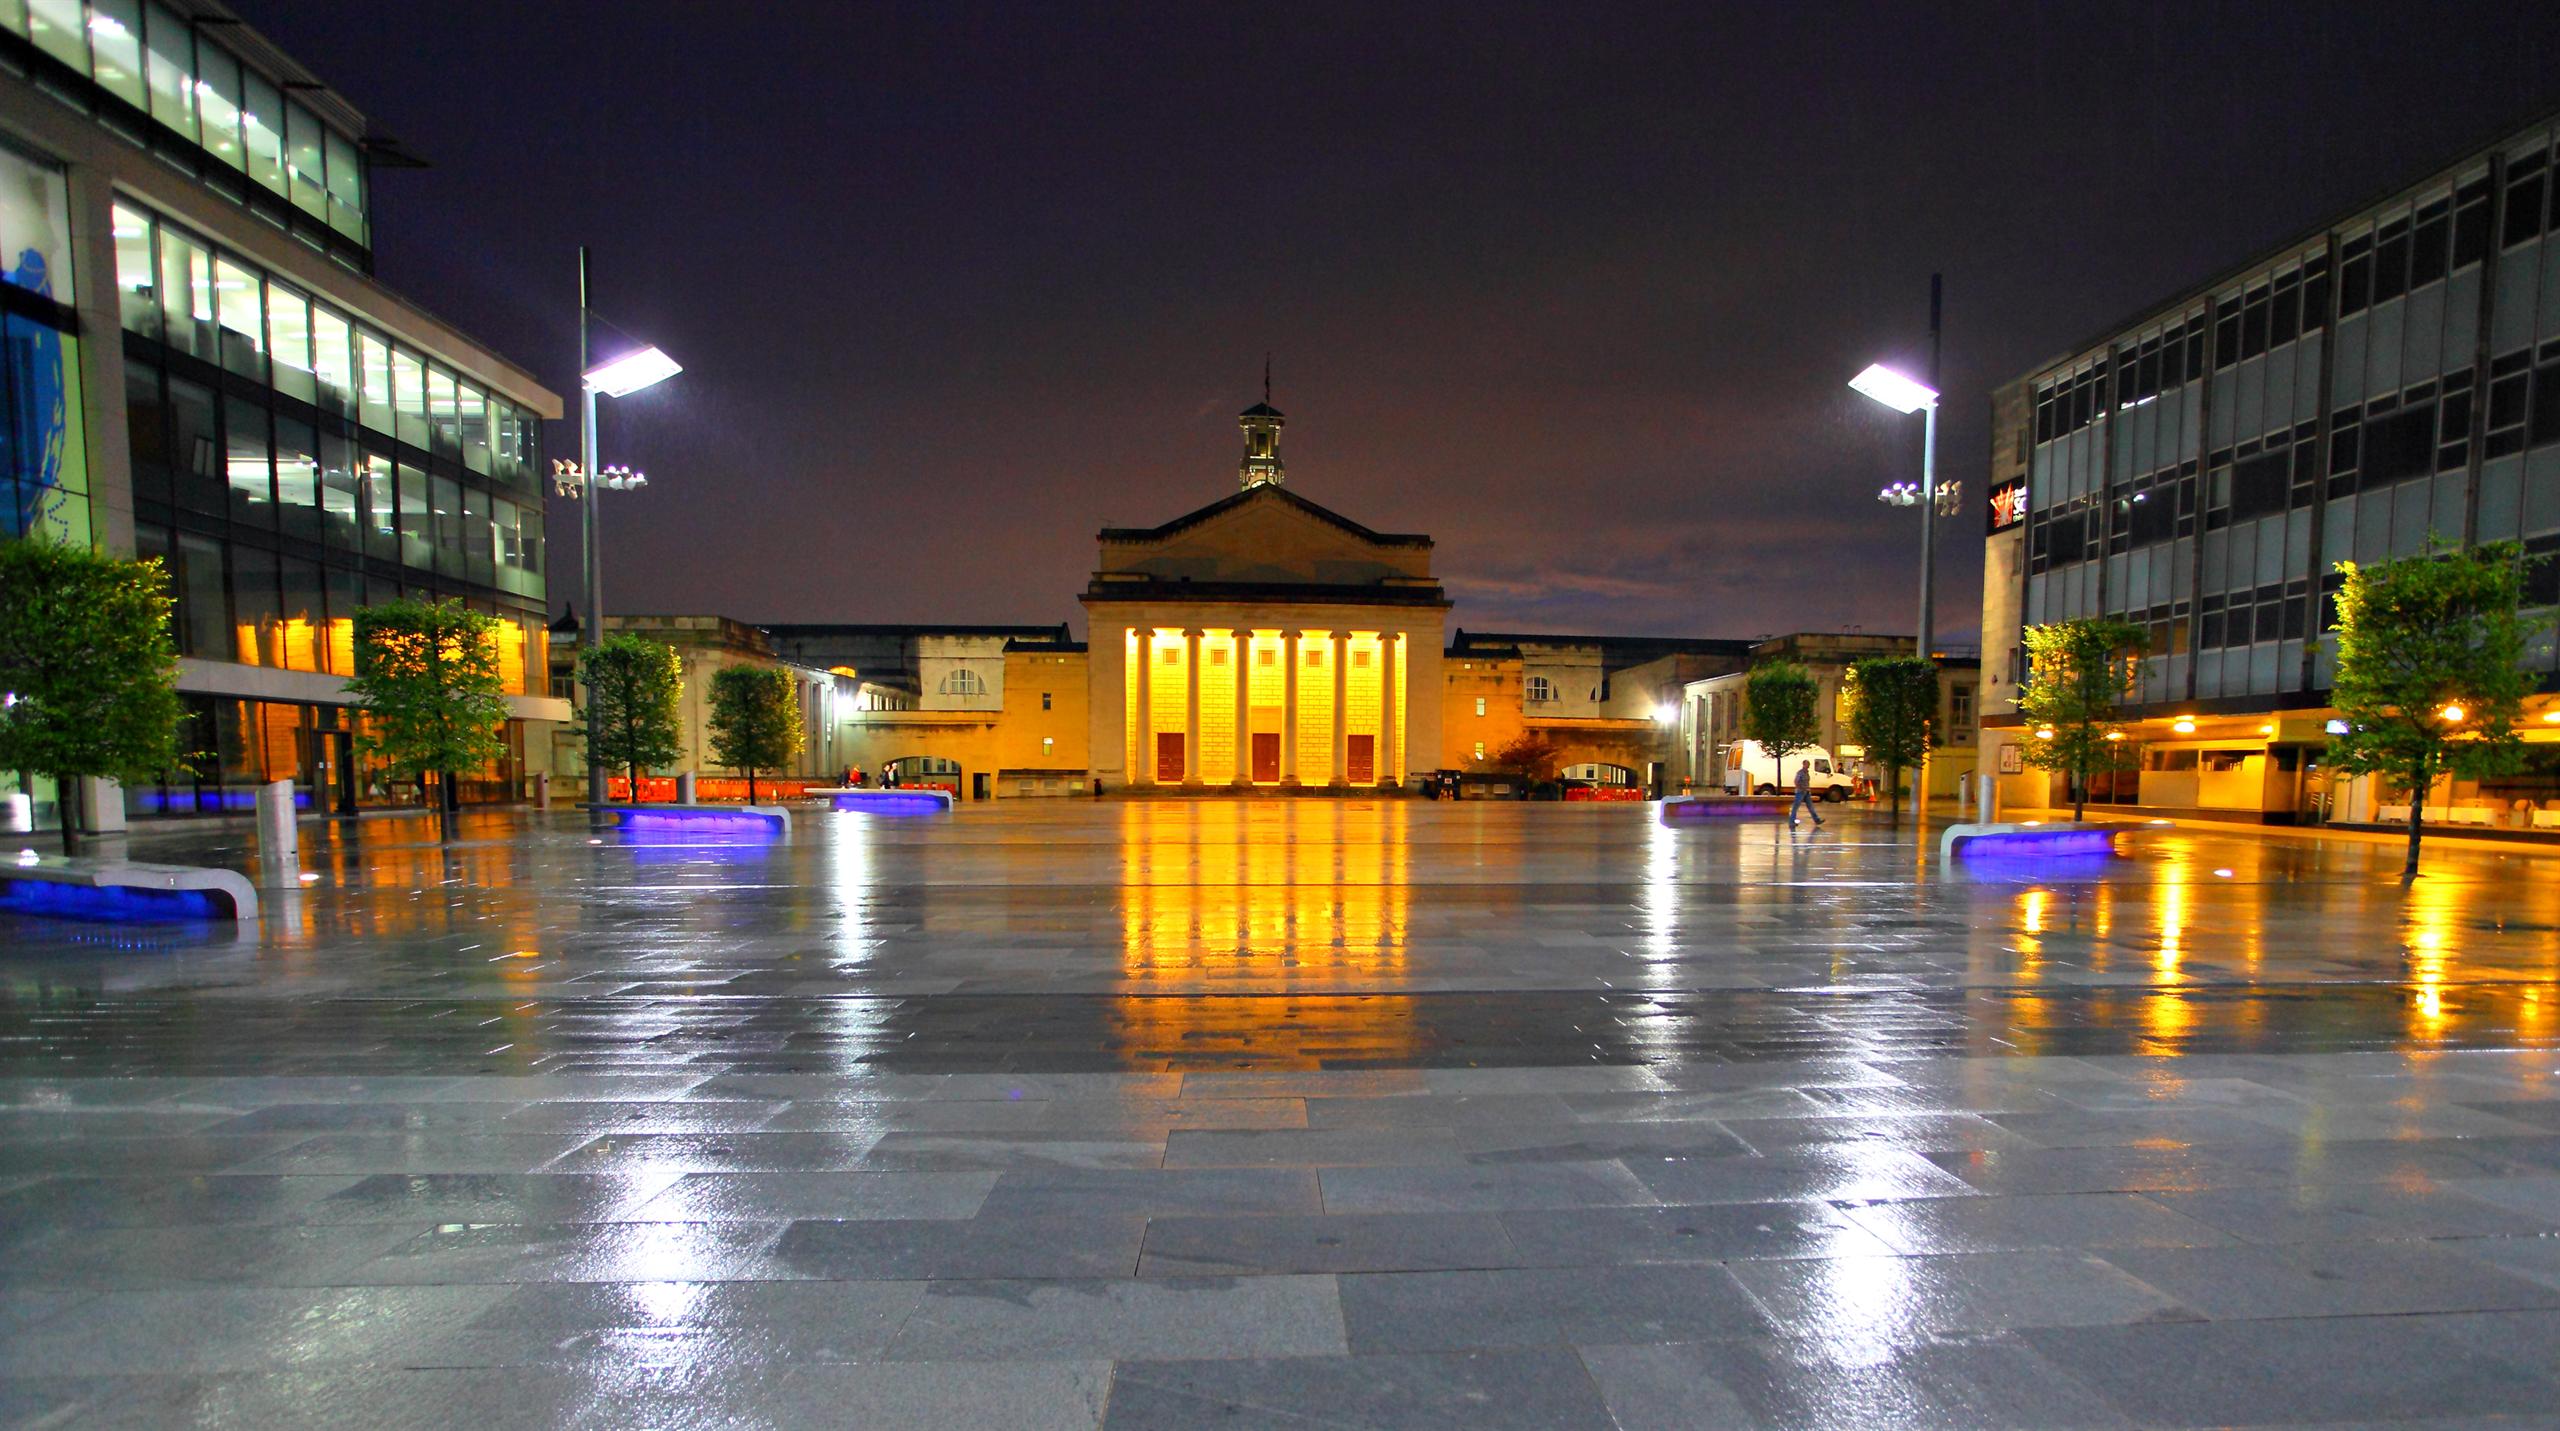 View of the square at night